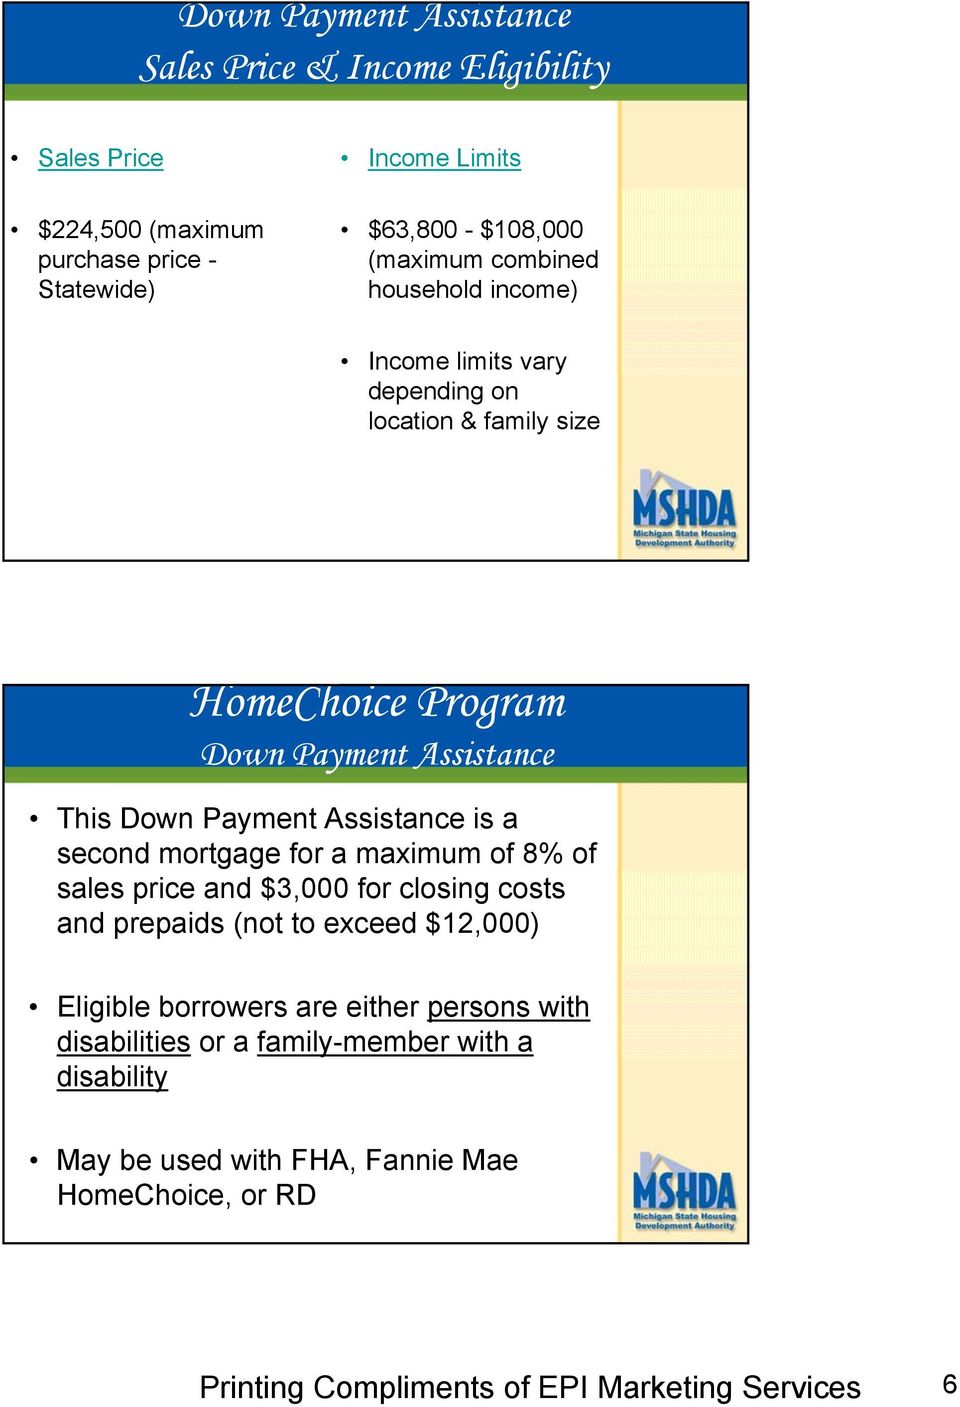 This Down Payment Assistance is a second mortgage for a maximum of 8% of sales price and $3,000 for closing costs and prepaids (not to exceed